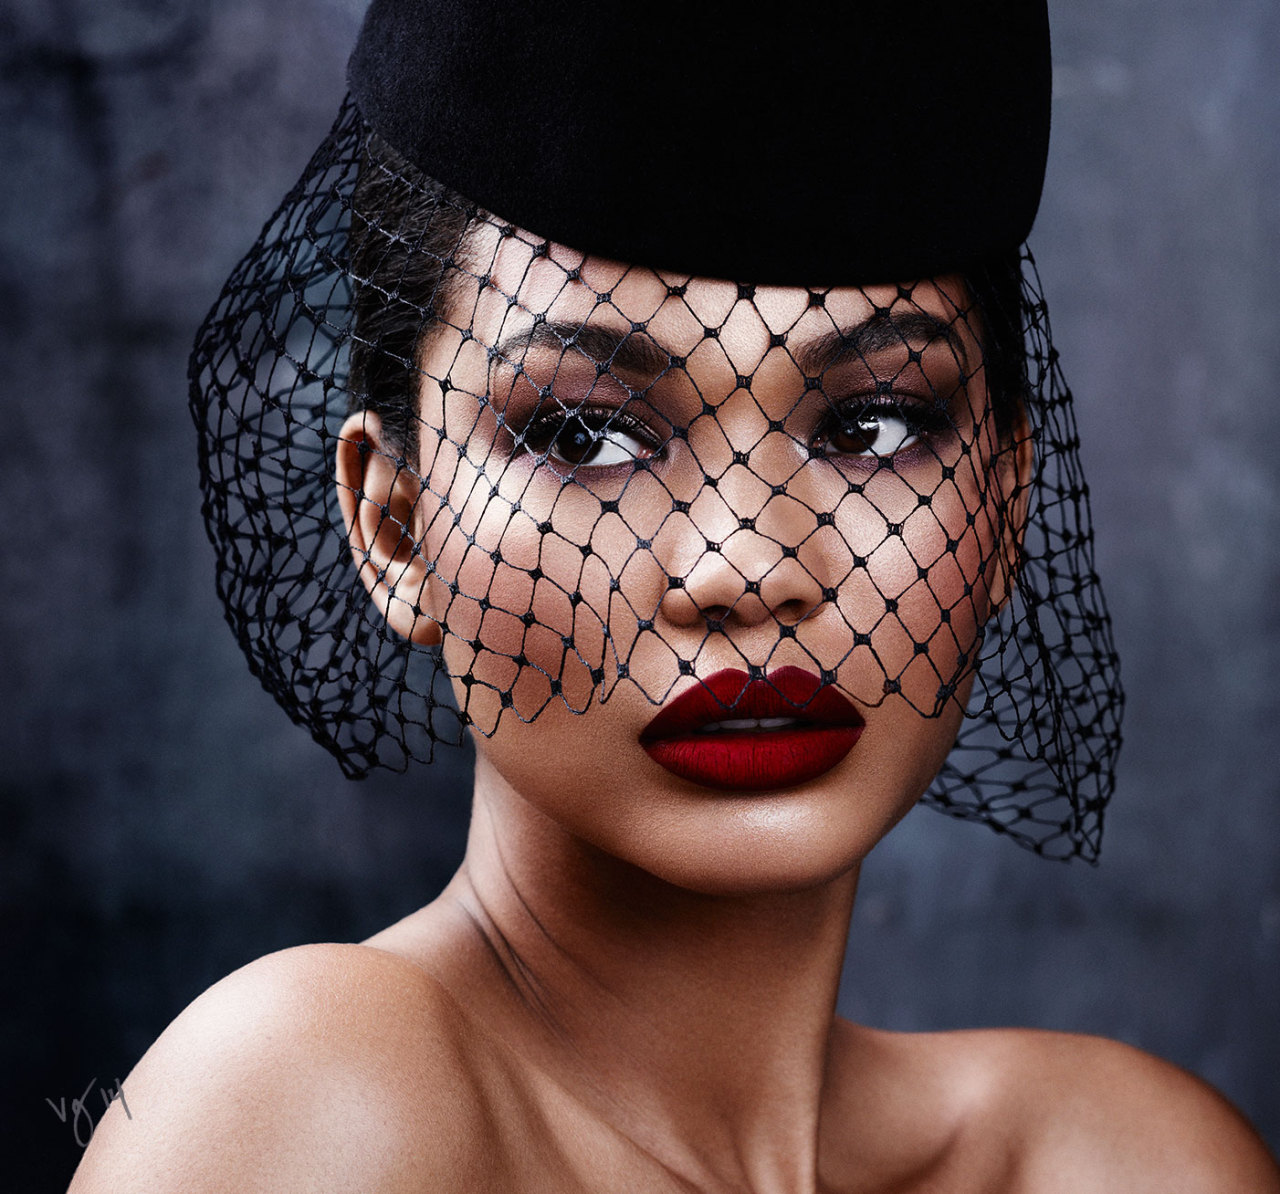 imgmodels:  Chanel Iman photographed by Ben Hassett for Violet Grey’s The Violet